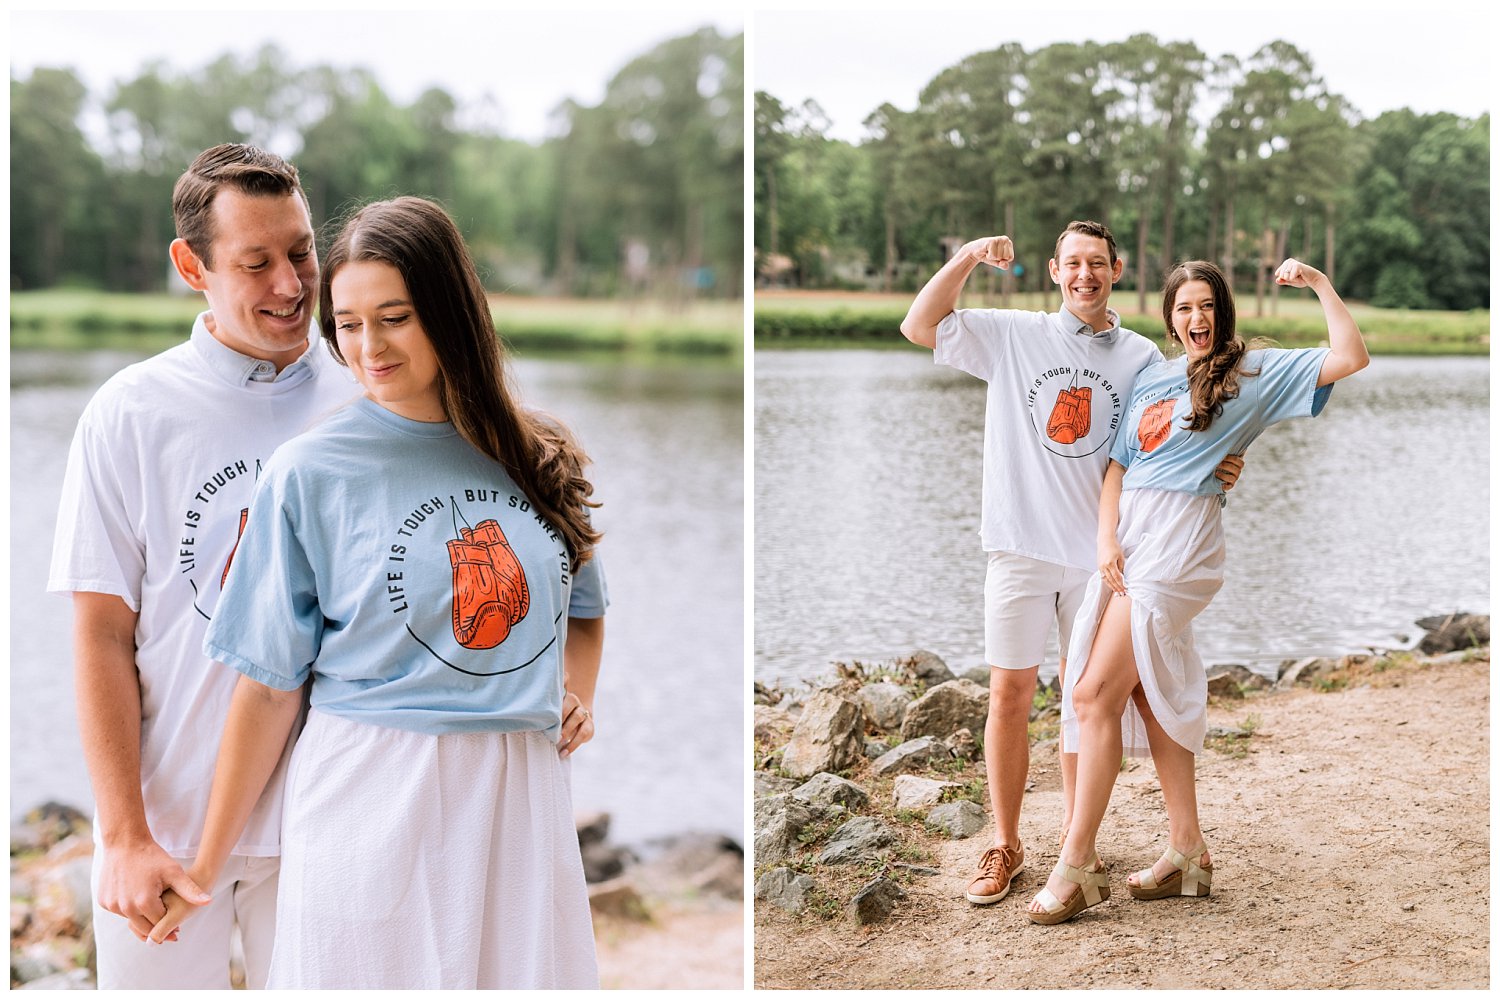 Foggy lakeside engagement session in Richmond, Virginia photographed by Heather Dodge